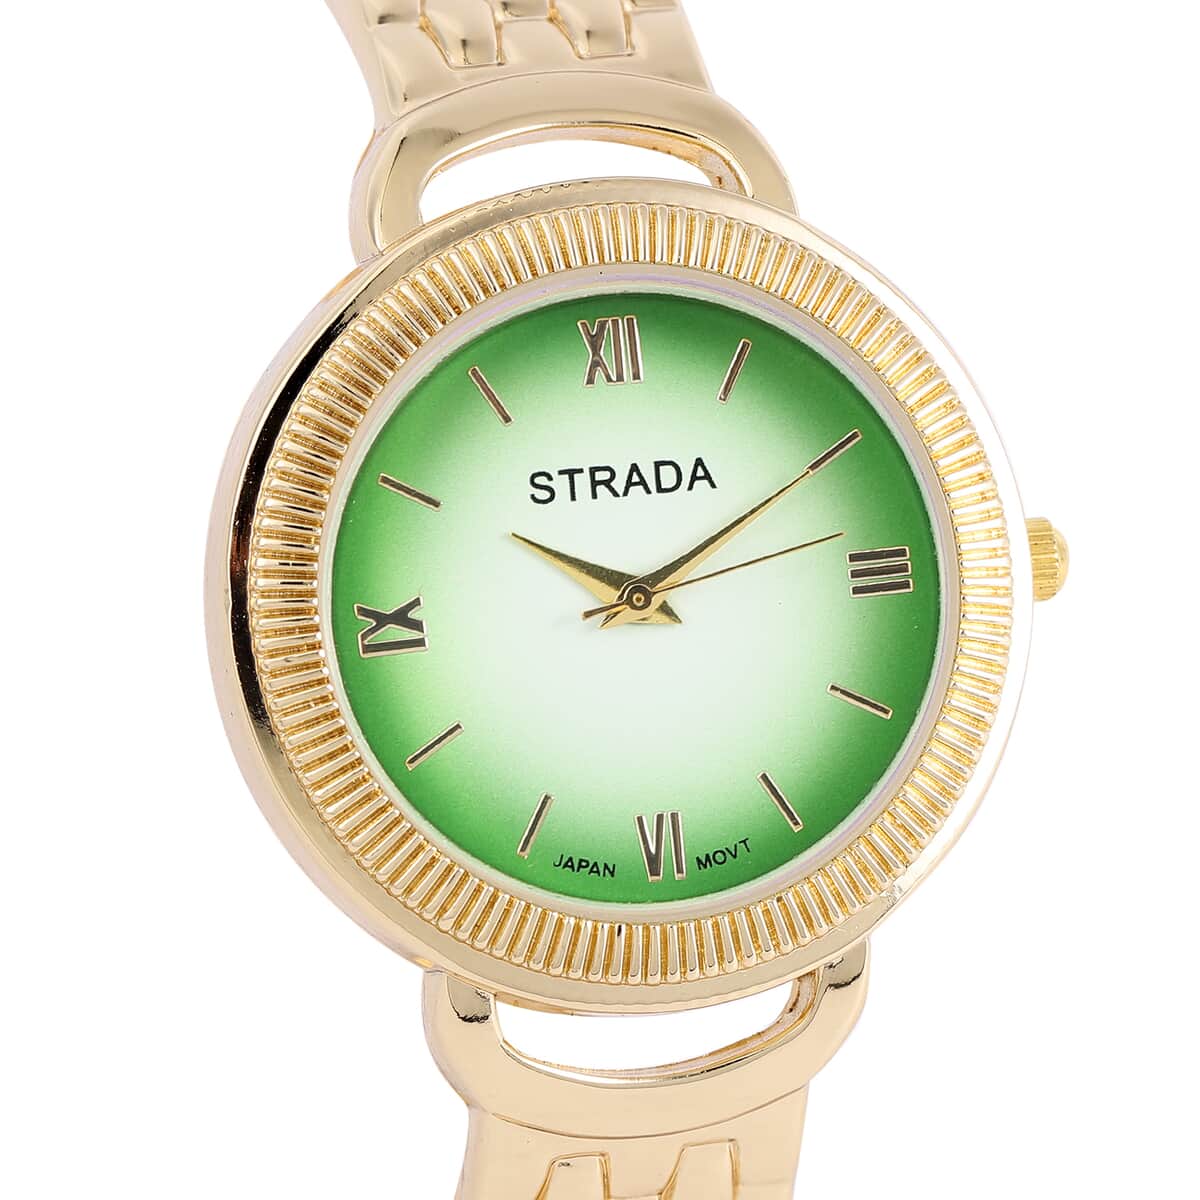 STRADA Japanese Movement Bangle Watch with Green Dial in Goldtone (6.5-7.0In) image number 3